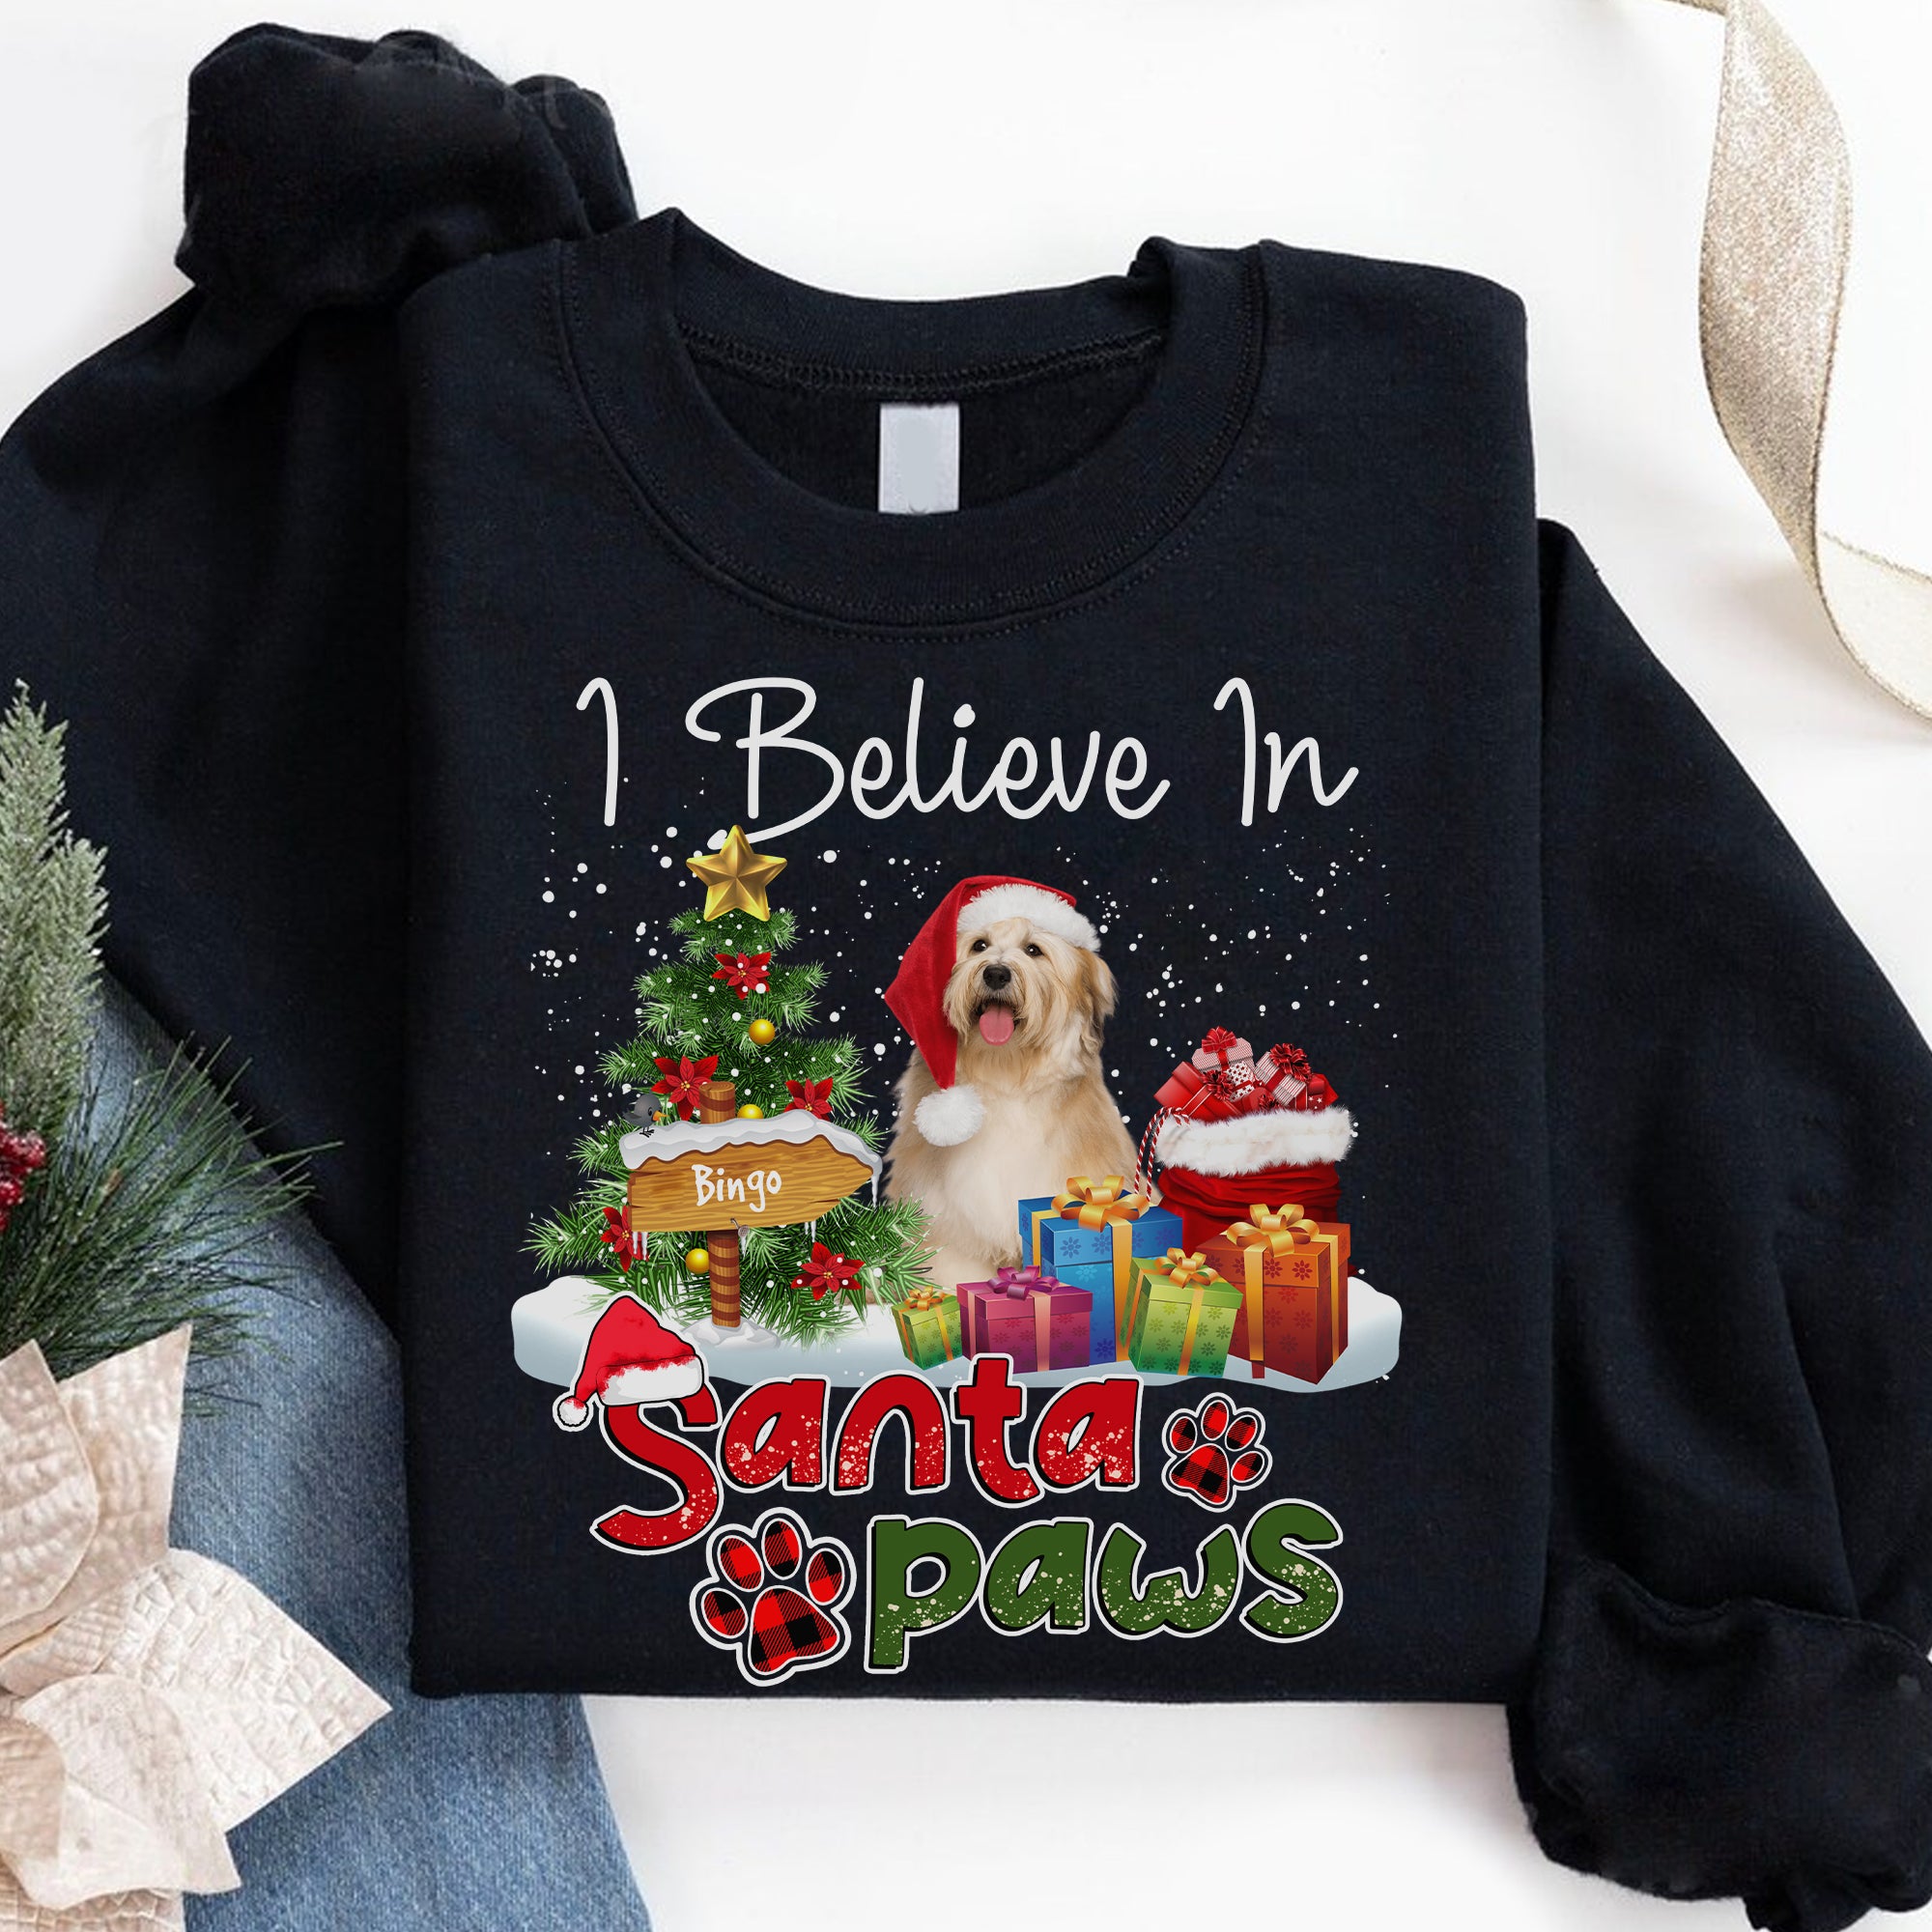 I Believe In Santa Paws- Christmas Gift For Dog Lovers - Personalized Dark Color Sweatshirt